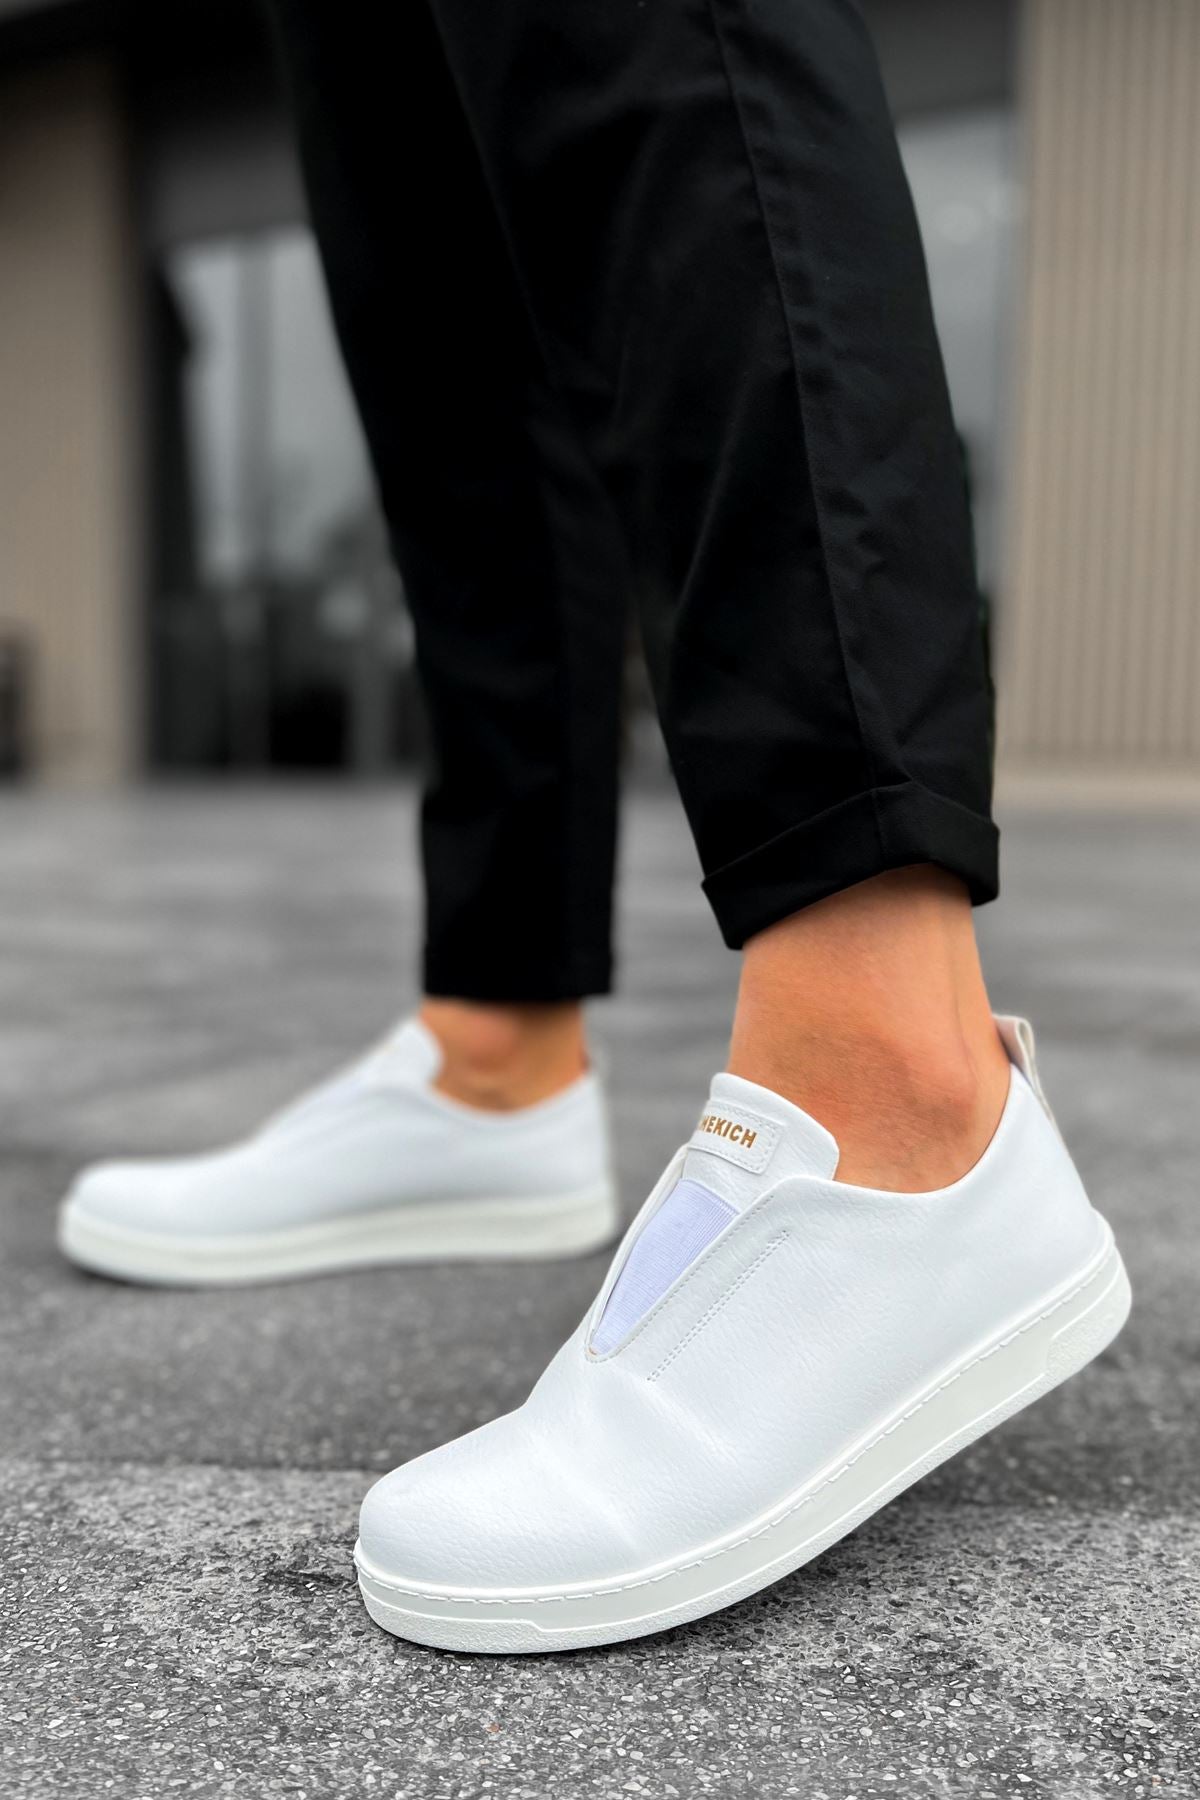 CH 195 men's sneakers shoes WHITE - STREETMODE™